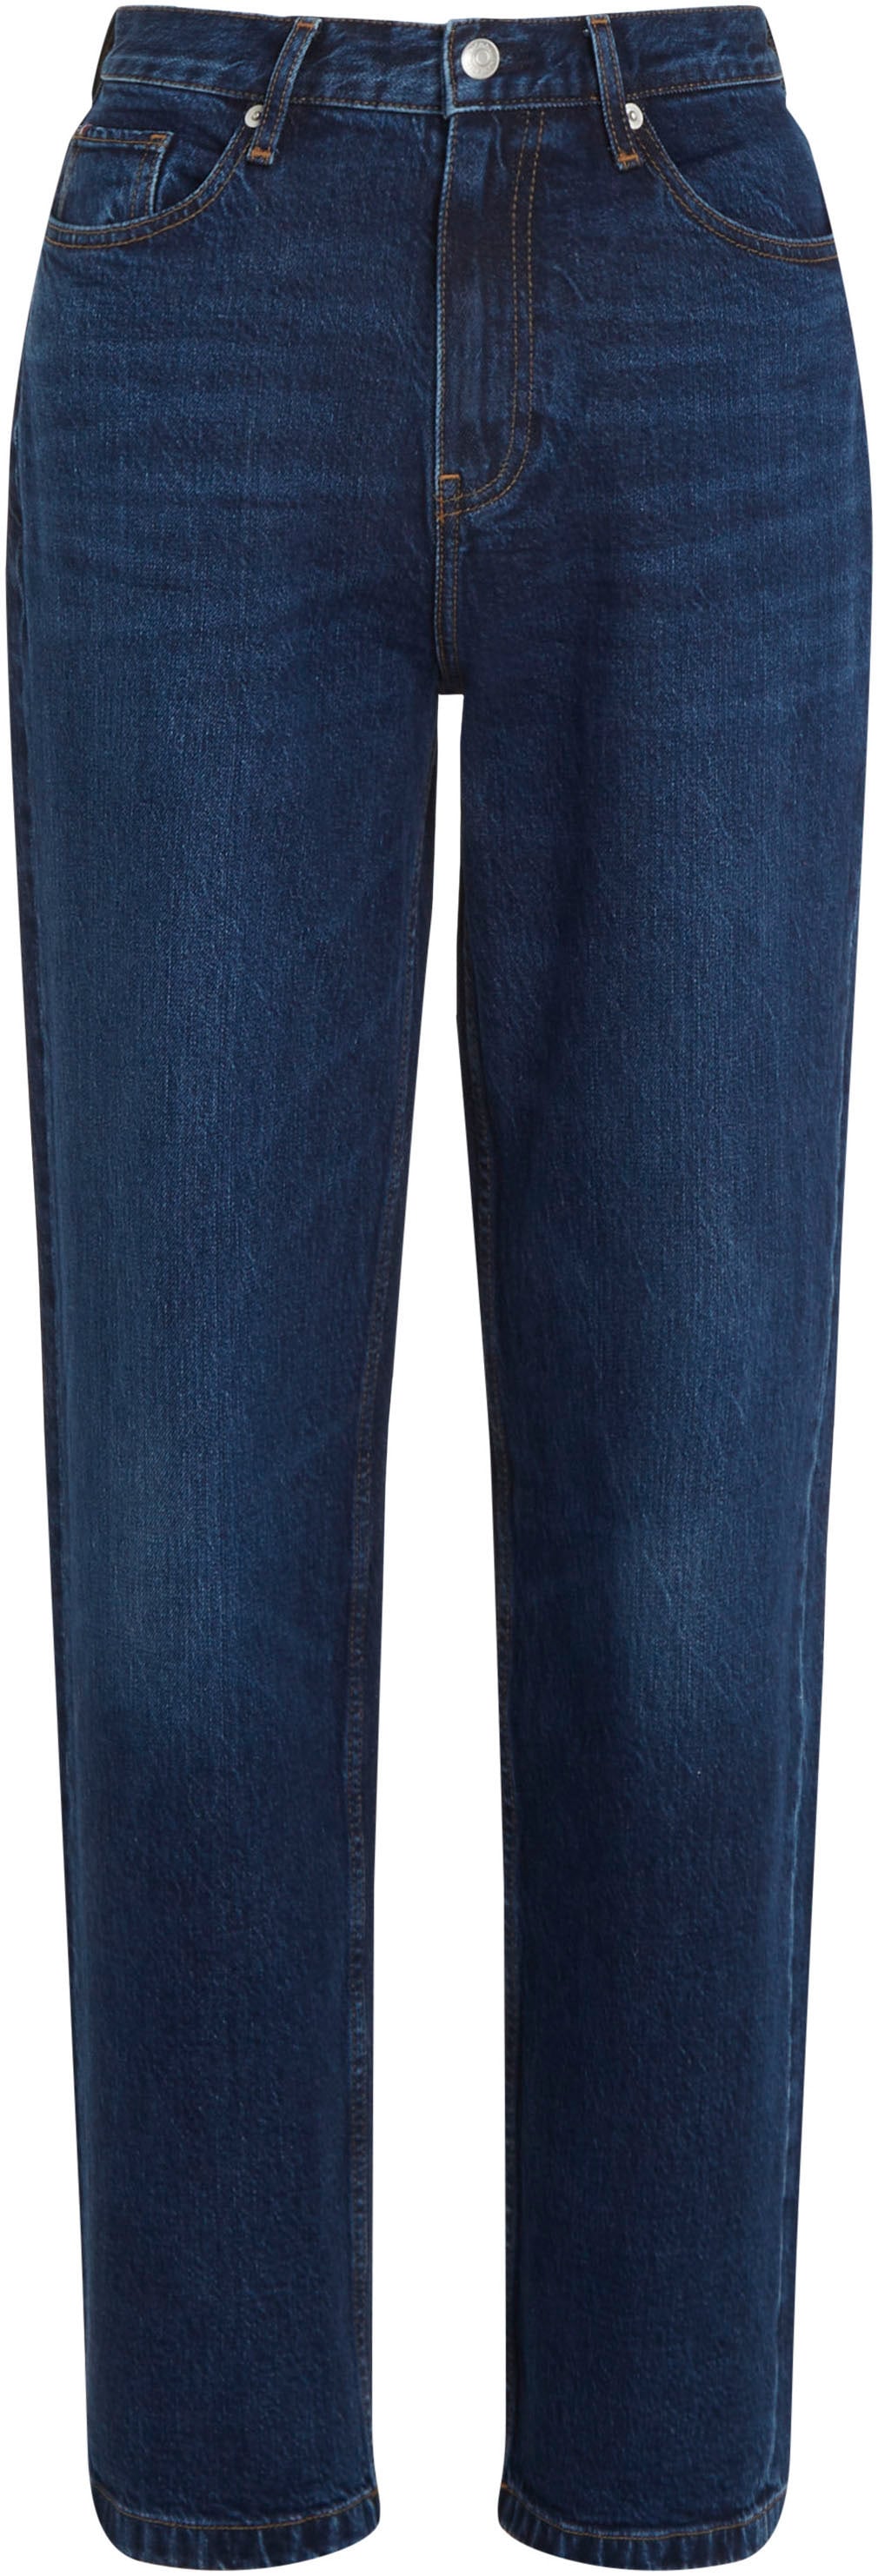 PAM«, weißer in Tommy Relax-fit-Jeans Waschung »RELAXED Hilfiger online kaufen HW STRAIGHT